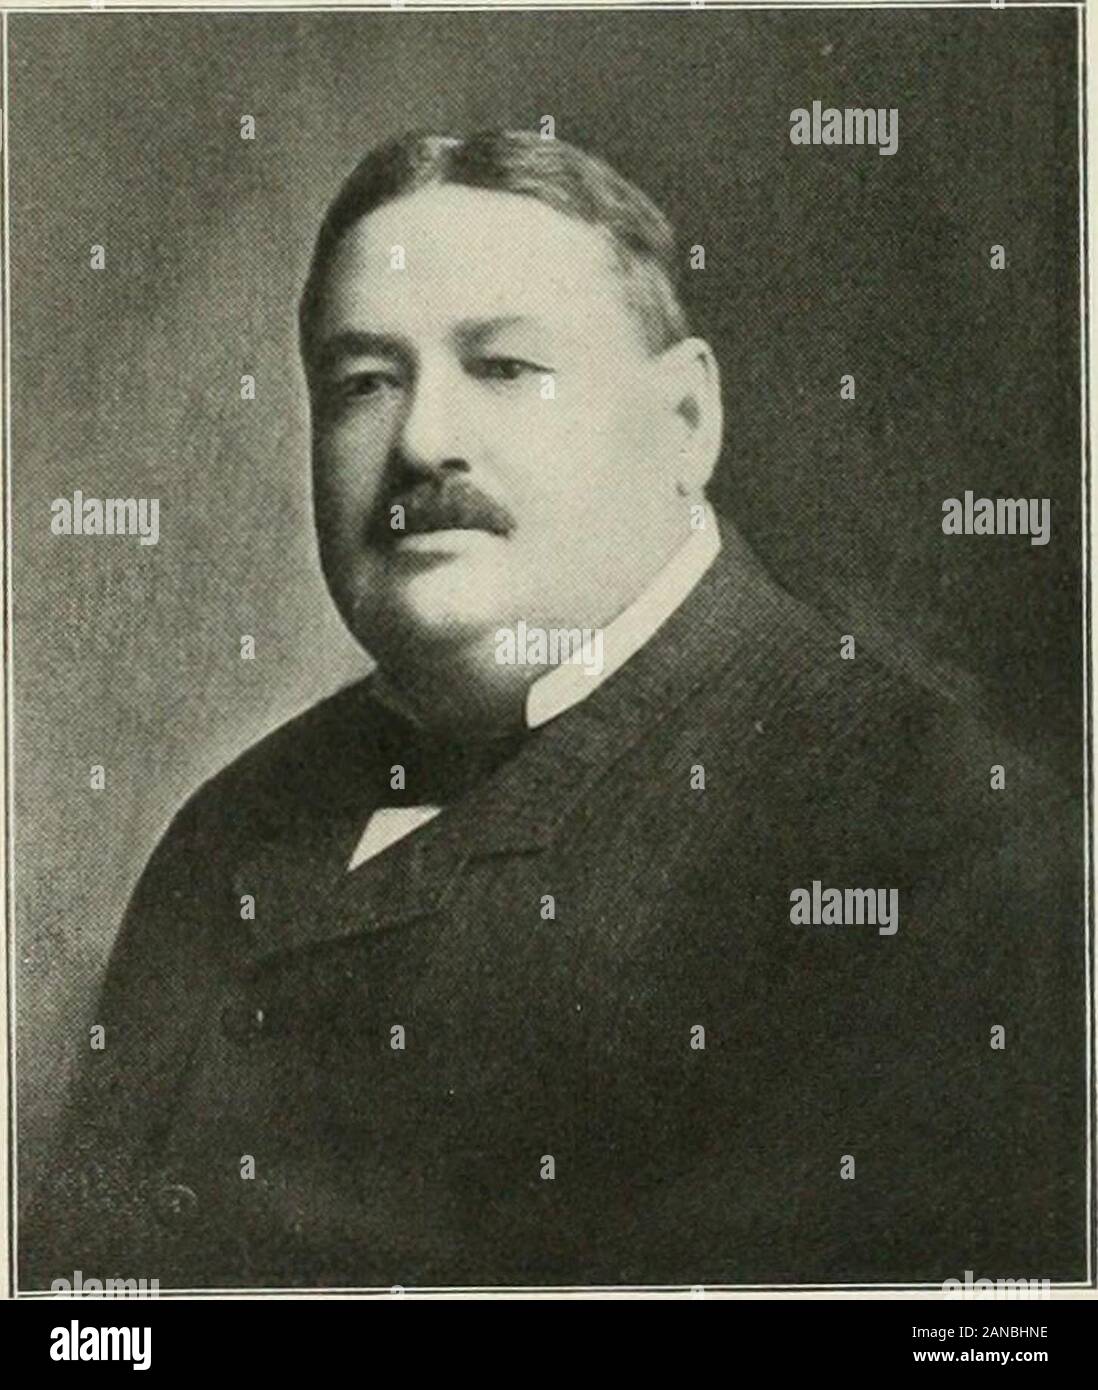 Notable men of Chicago and their city . CRIBBEN. WILLIAM H., manufacturer of stoves; b. Rochester. N.Y.. June 7, 1855: s. Henry and Maria Crlbben; clubs: UnionLeague. Oak Park; residence. Oak Park; office. 359-443 Erit St. CRANE, WILLIAM BANTIN, lumberman; b. Eaton, Preble Co.. O..Tune IS 1S4C; s. William and Maria Harbinson Crane; 1861-7 9 in the timber business Peru, Ind.: went into lumber businessin Chicago. 1S81. since then conducting business as W. B. Crane& Co.; plant and saw roUls at Falcon, Miss.; office, 913 W. 2 2aStreet. 79 Stock Photo